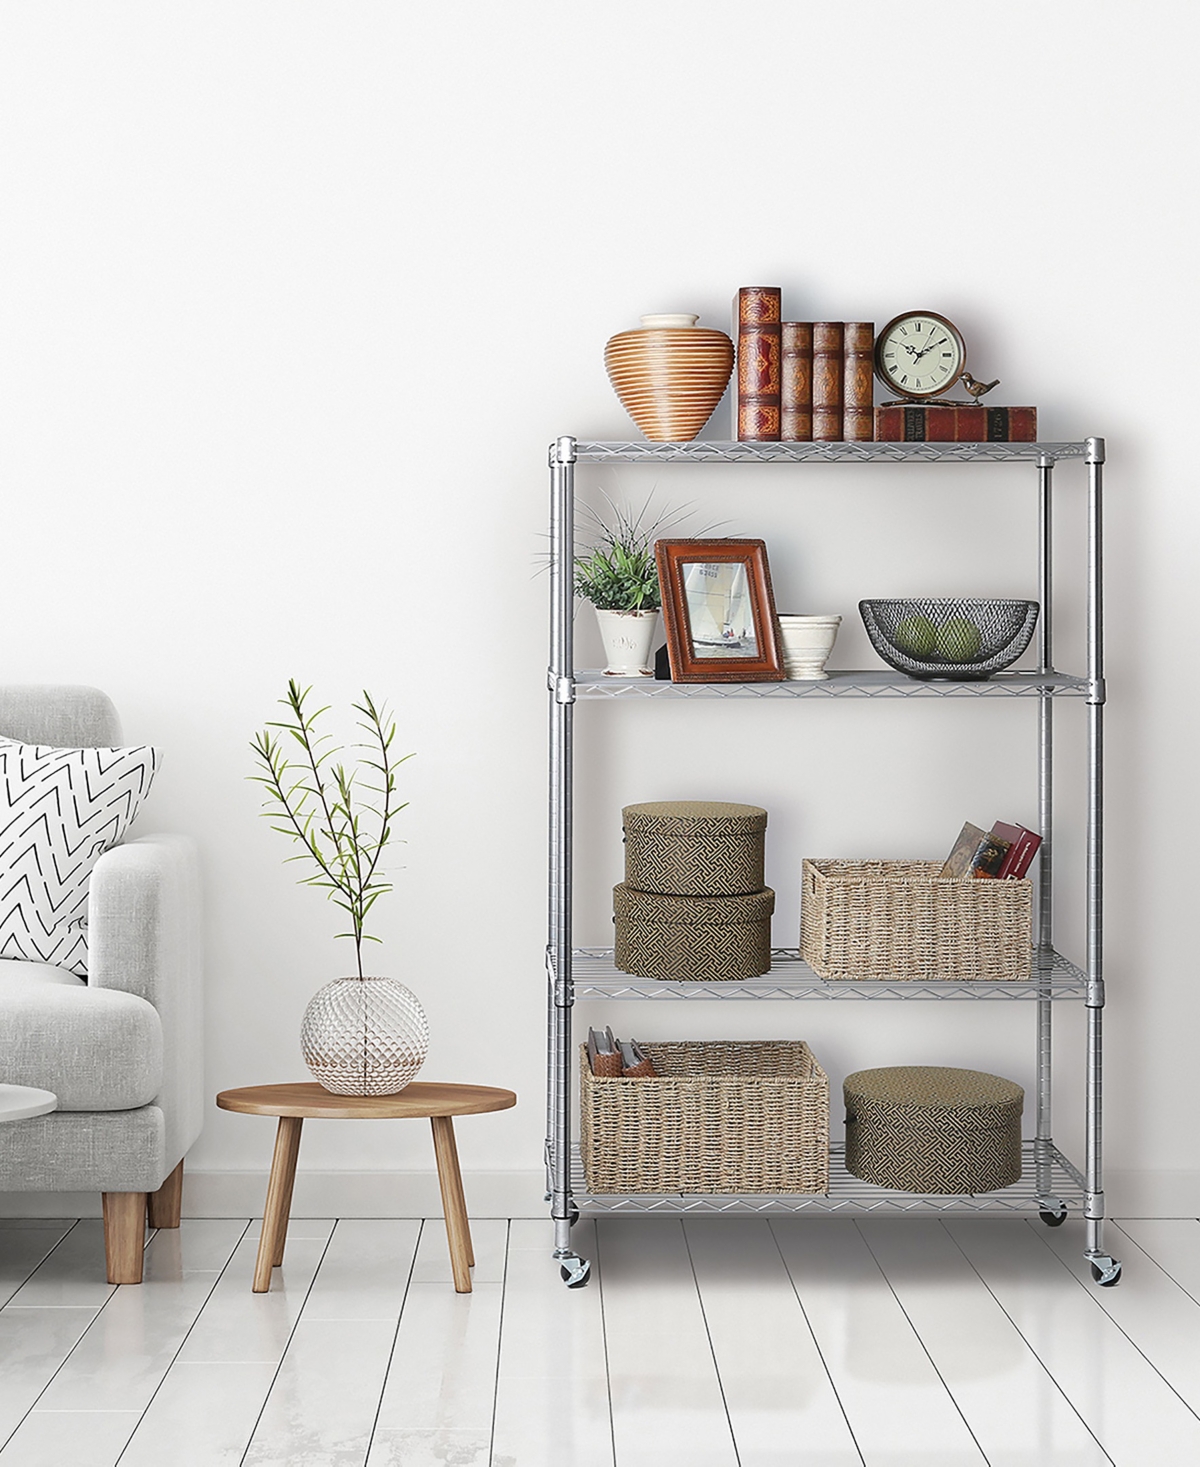 Shop Seville Classics Ultradurable 4-tier Nsf Steel Wire Shelving System In Chrome